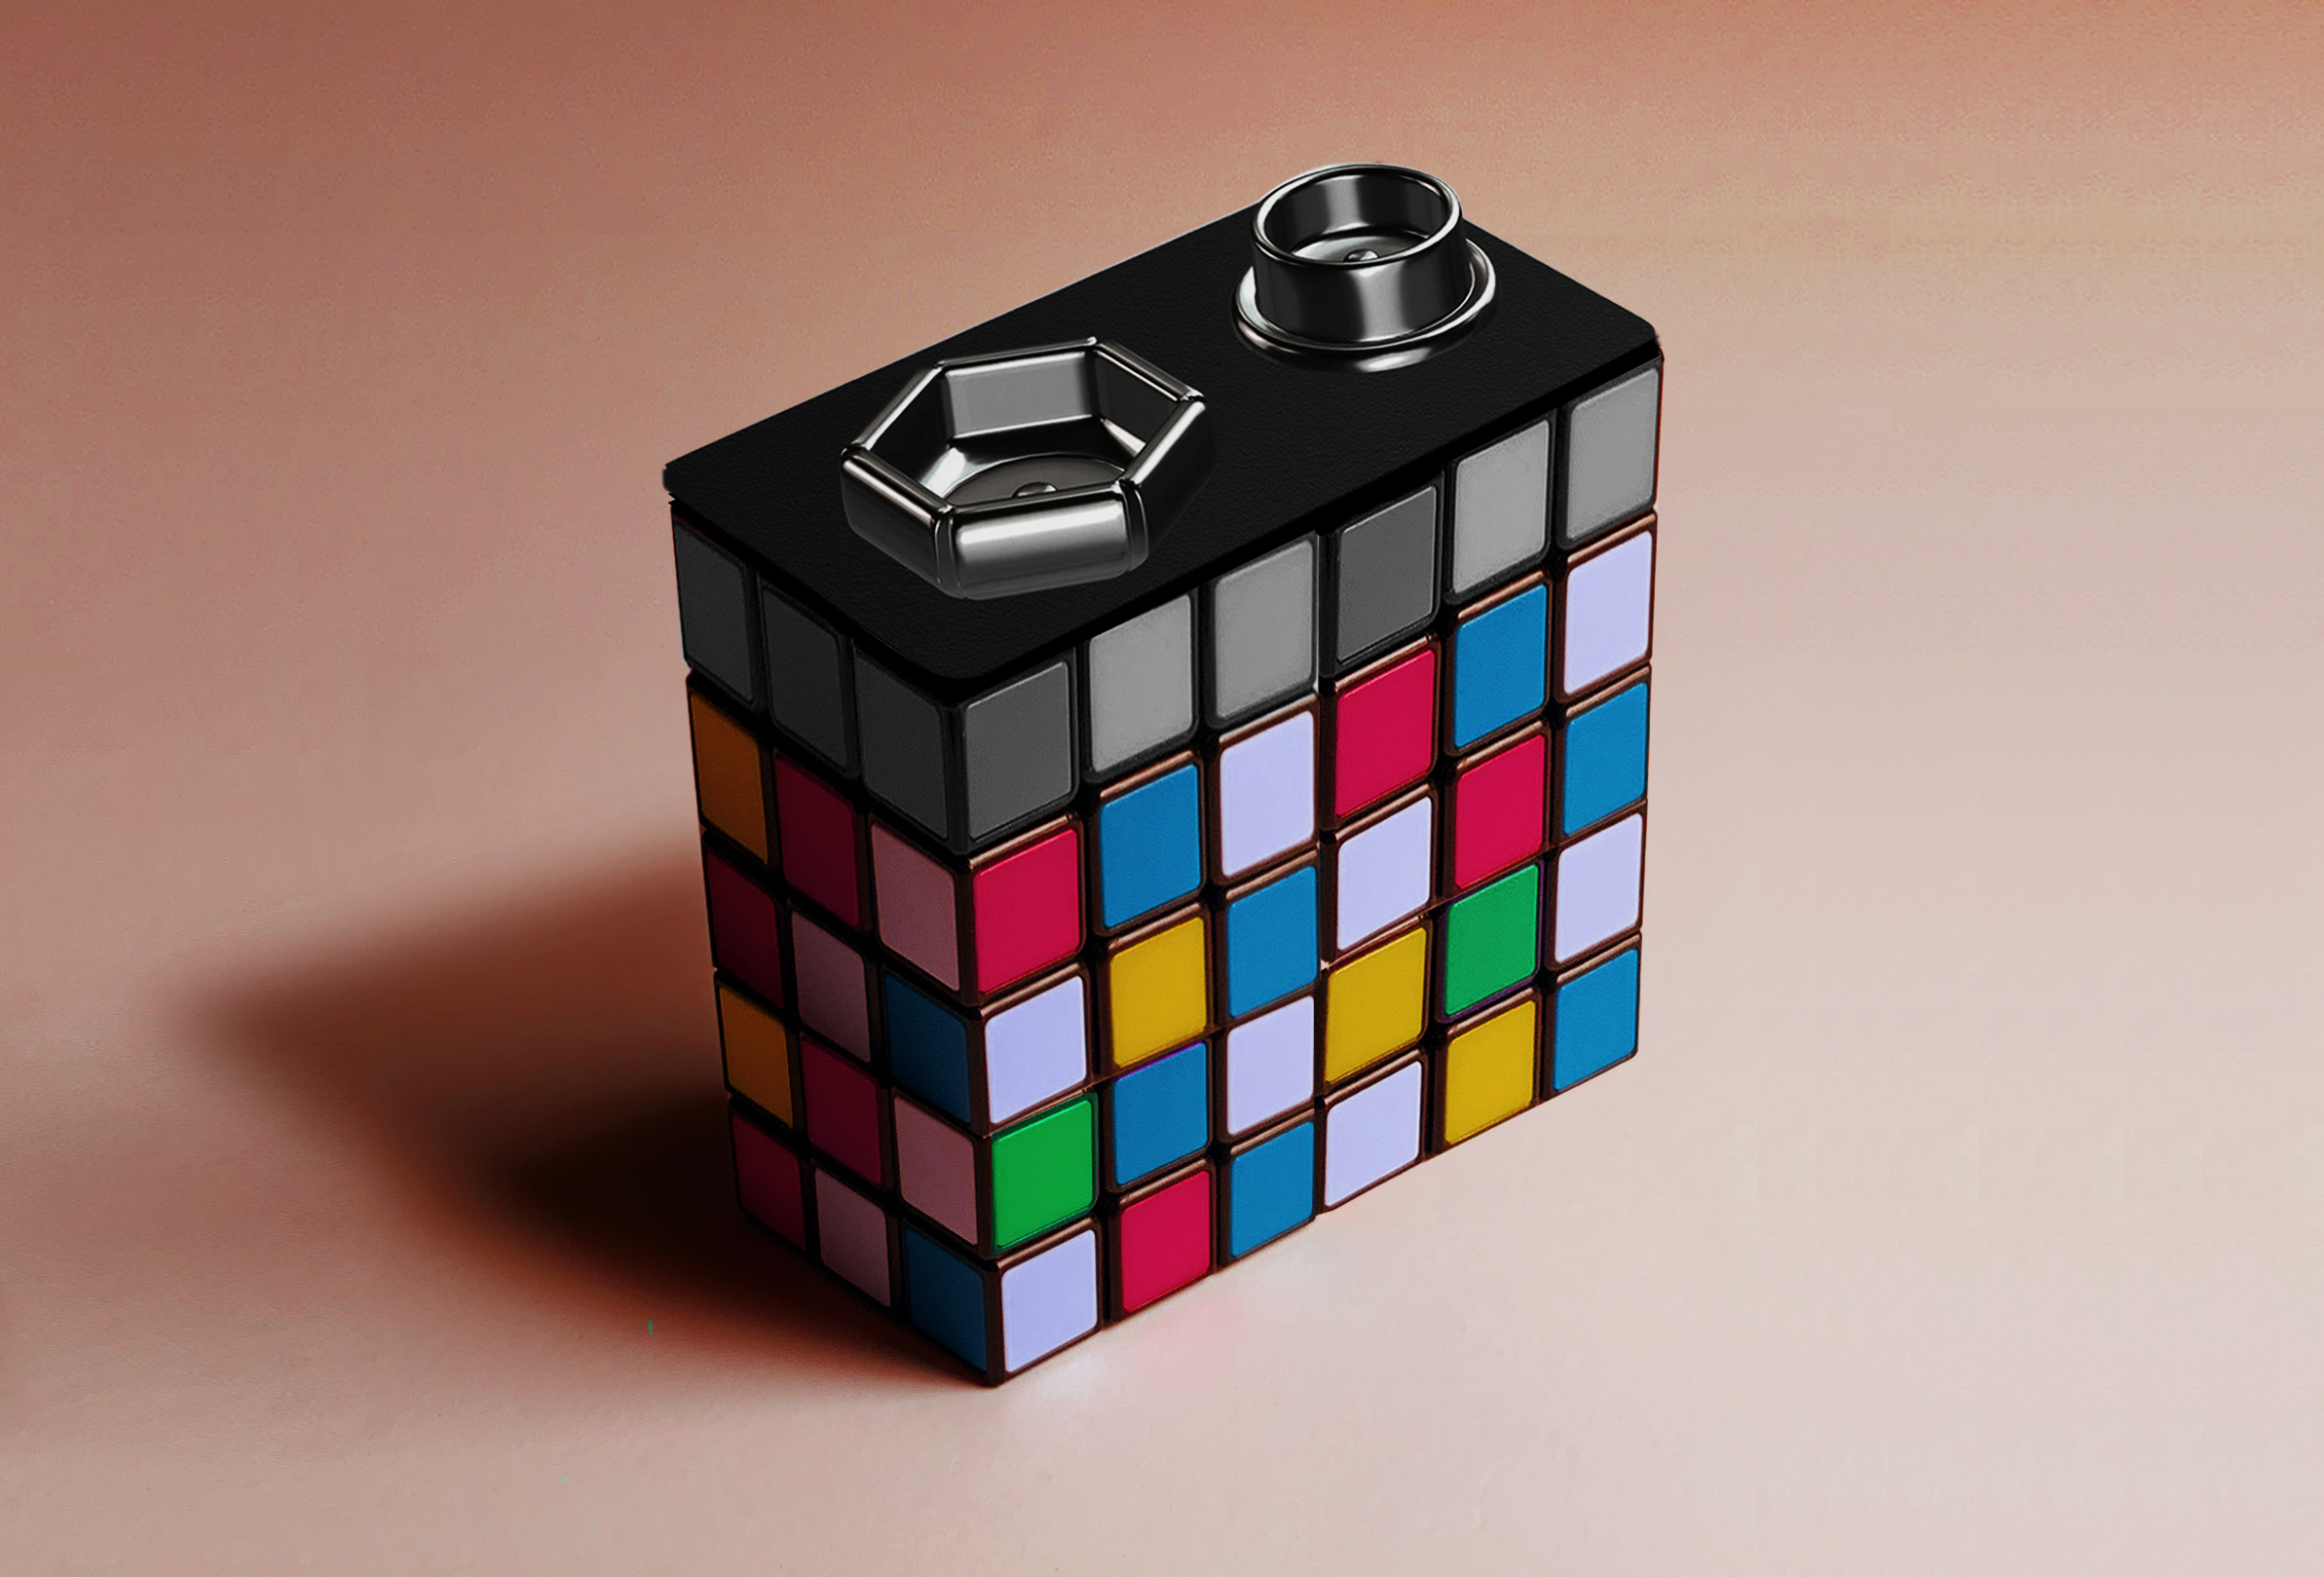 Conceptual illustration of a battery made out of a rubiks cube puzzle